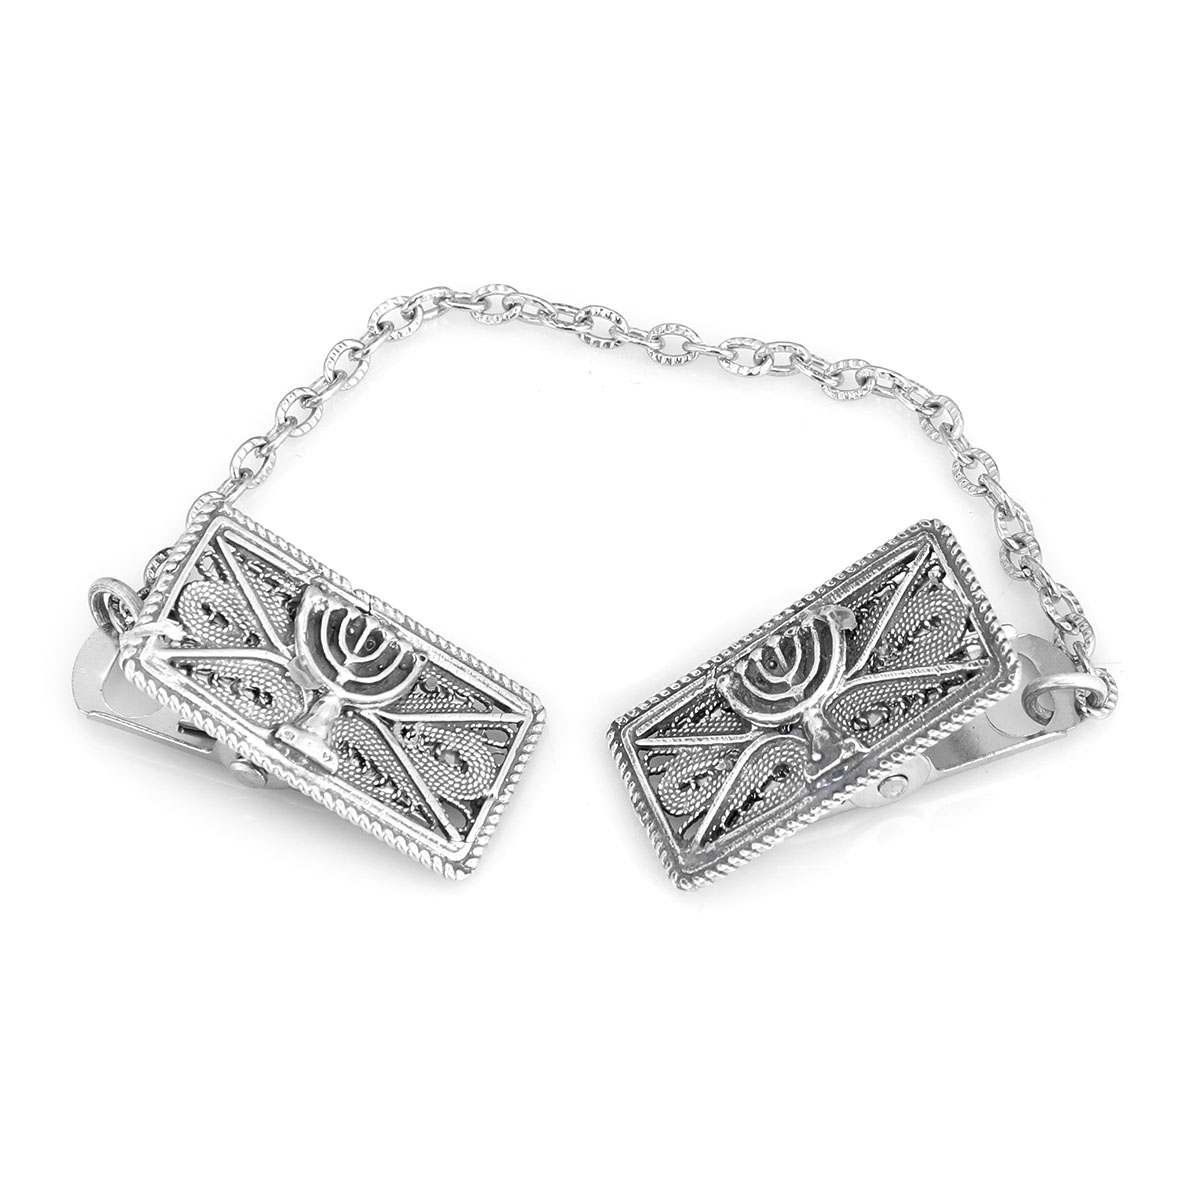 Traditional Yemenite Art Handcrafted  Sterling Silver Menorah Tallit Clips With Rope Motif - 1